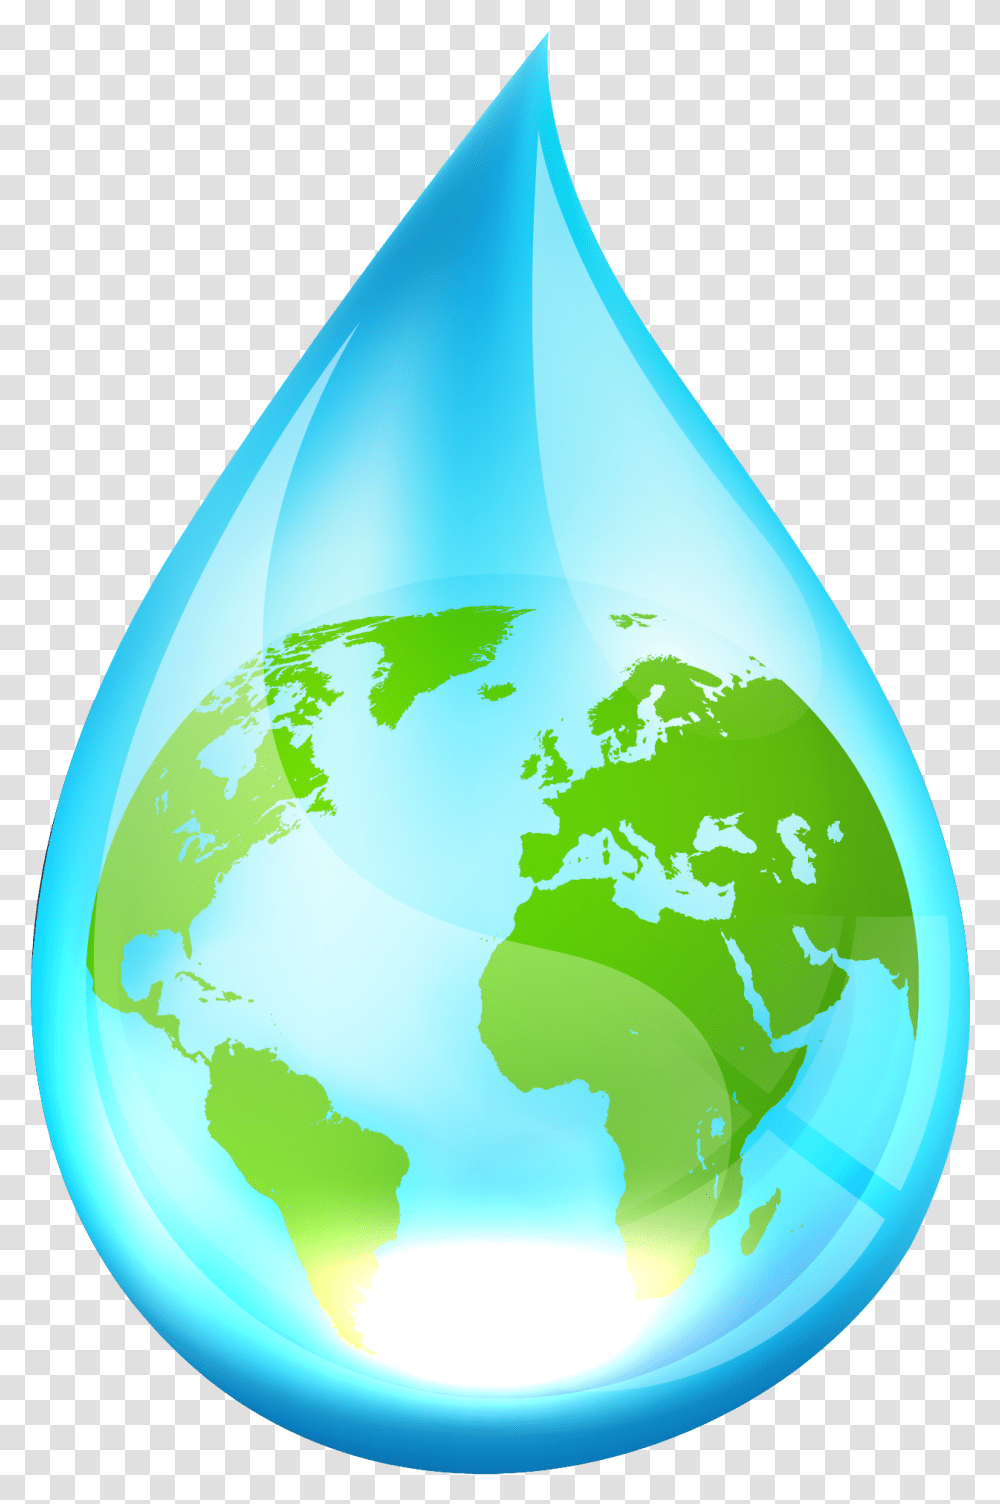 Water Droplet With World Download, Astronomy, Outer Space, Universe, Planet Transparent Png